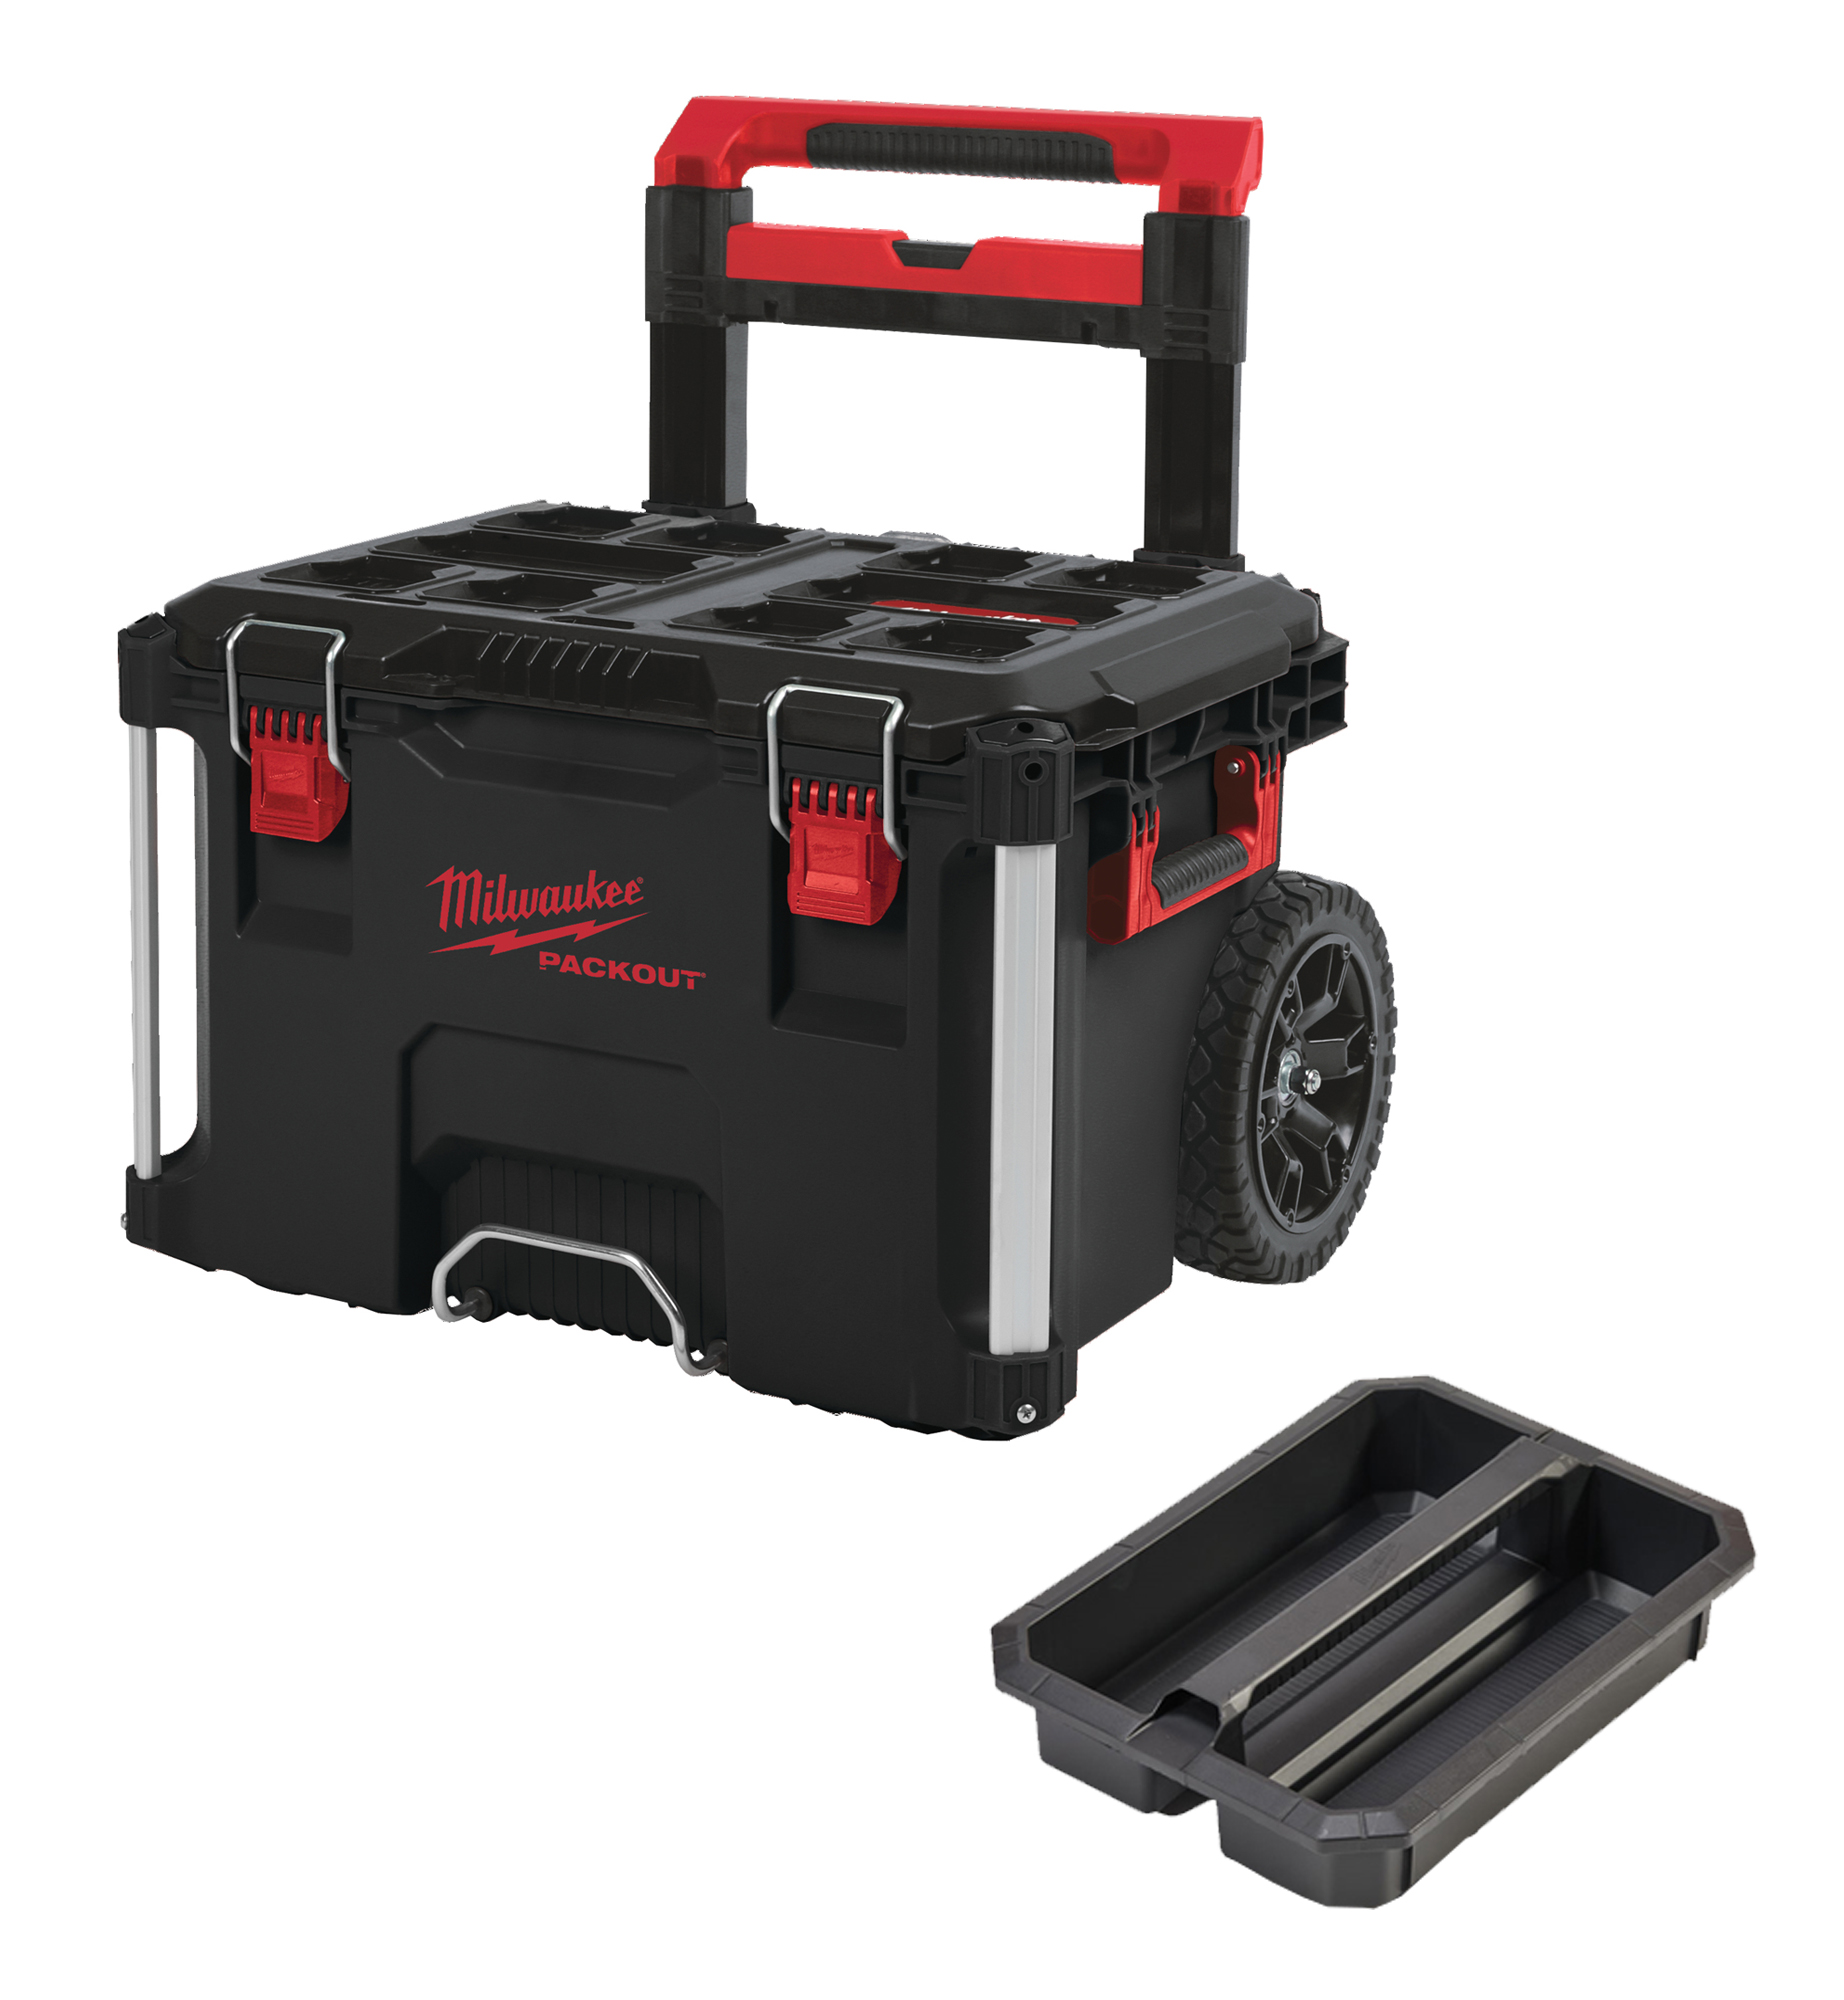 Milwaukee Packout - Packout Trolley Box & Tote Tray Insert - 4932464078&TOTE